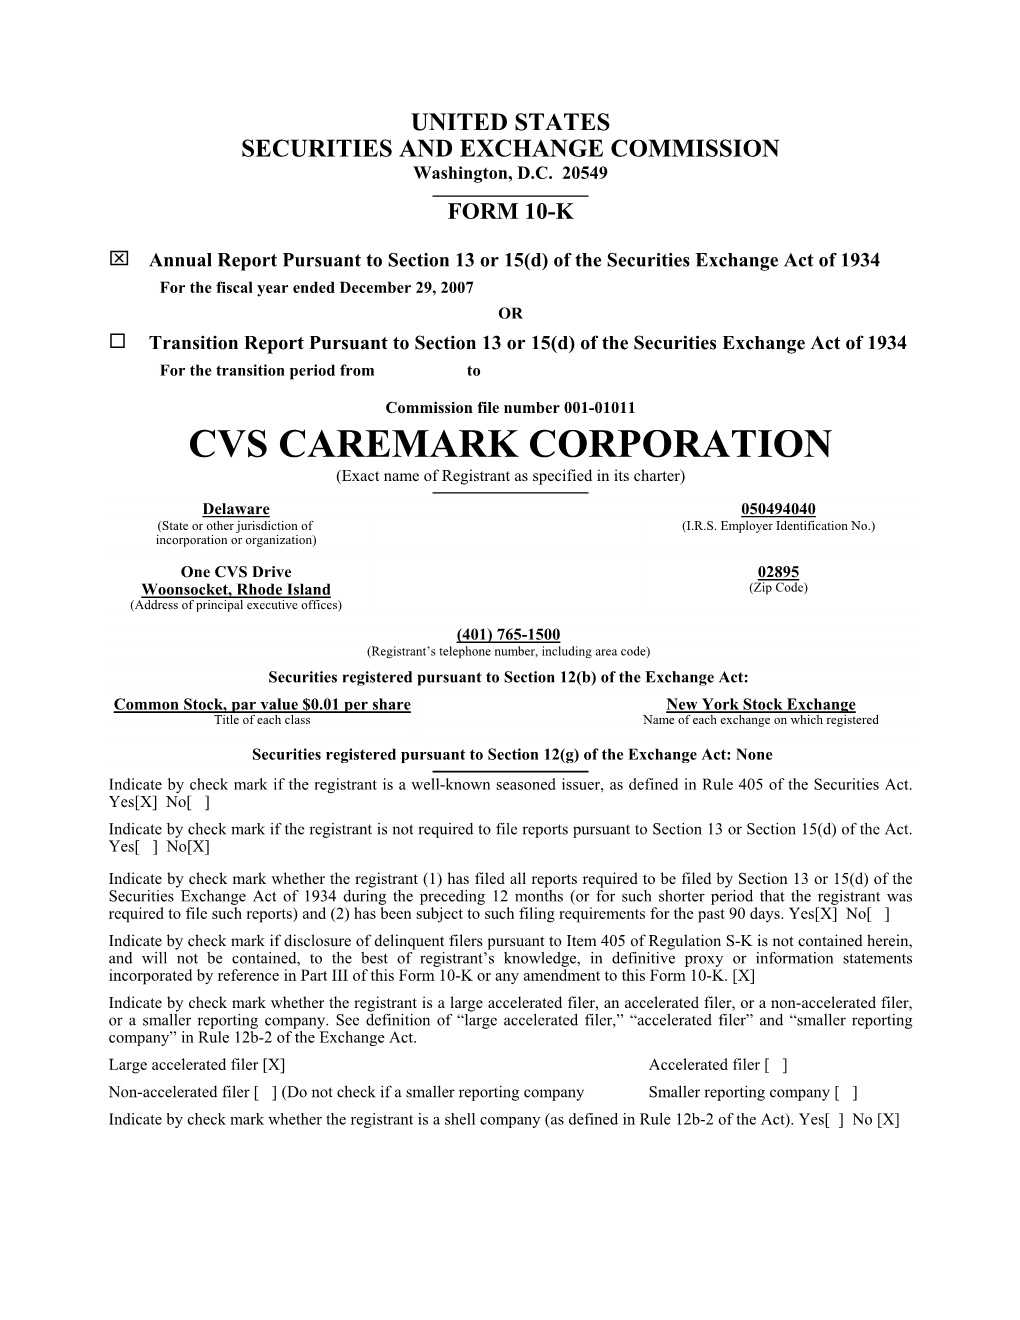 CVS CAREMARK CORPORATION (Exact Name of Registrant As Specified in Its Charter)